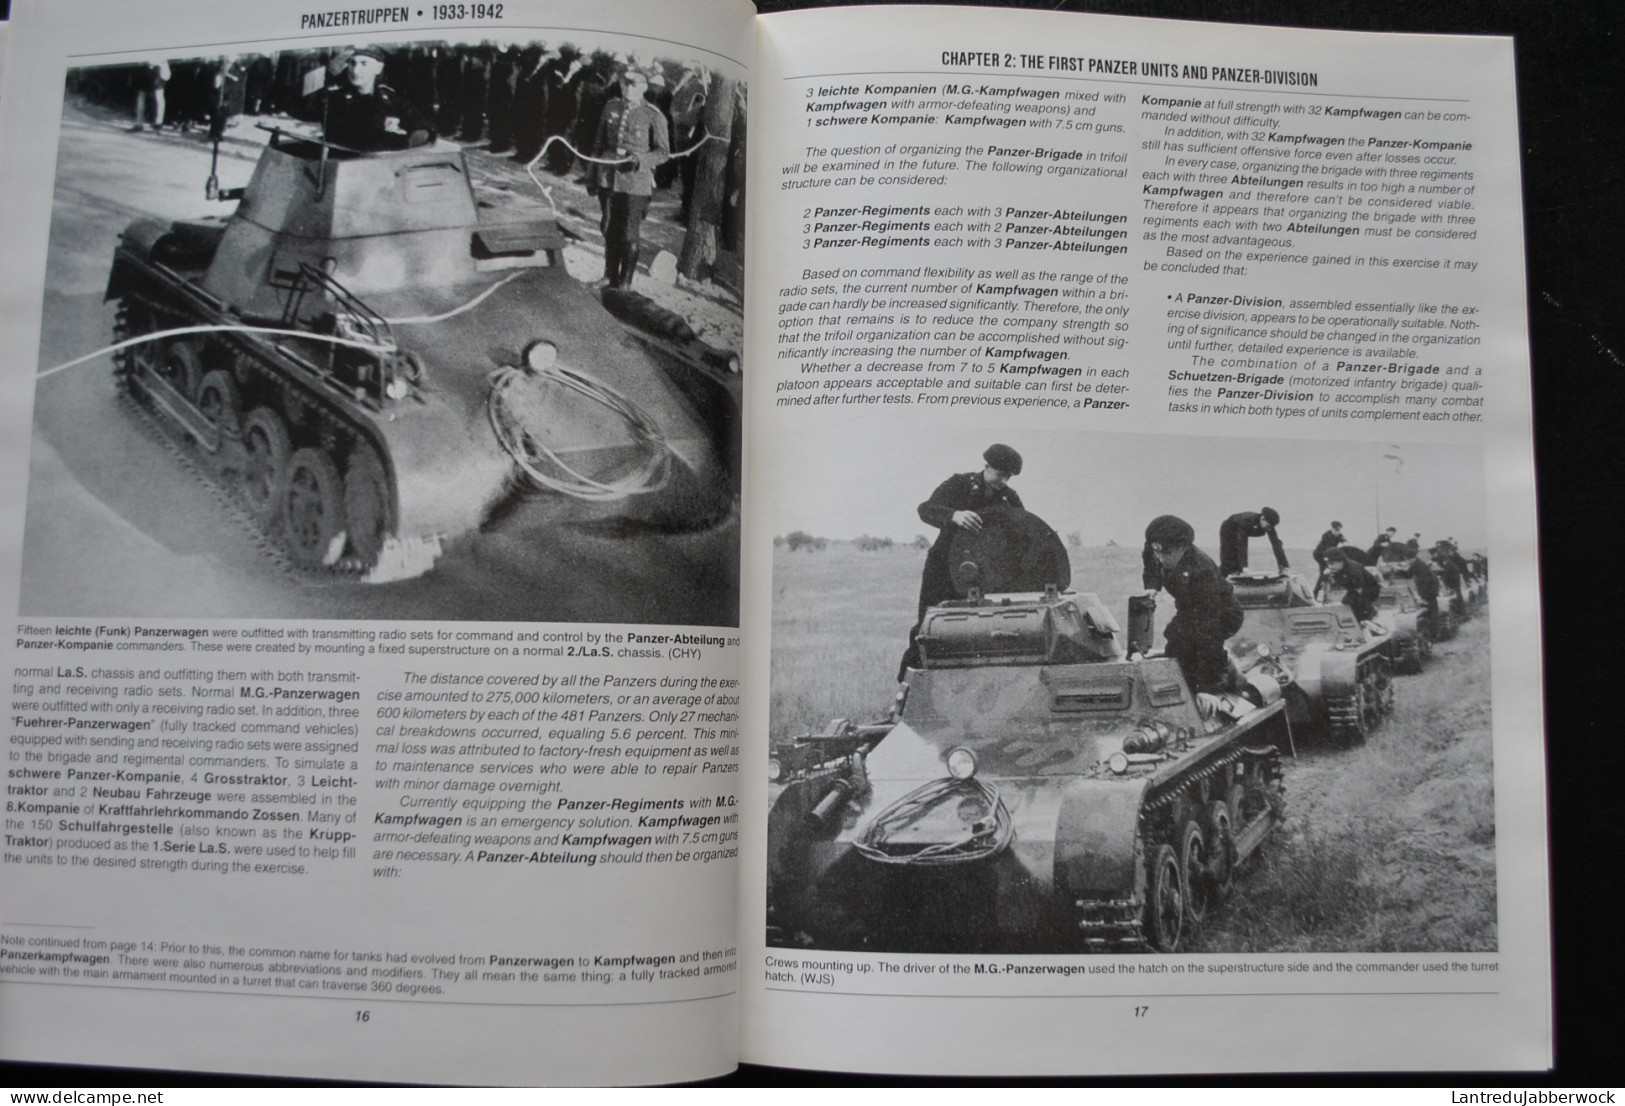 PANZER TRUPPEN VOL. 1 THE COMPLETE GUIDE TO THE CREATION & COMBAT EMPLOYMENT OF GERMANY'S TANK FORCE 1933-1942 RARE - Veicoli